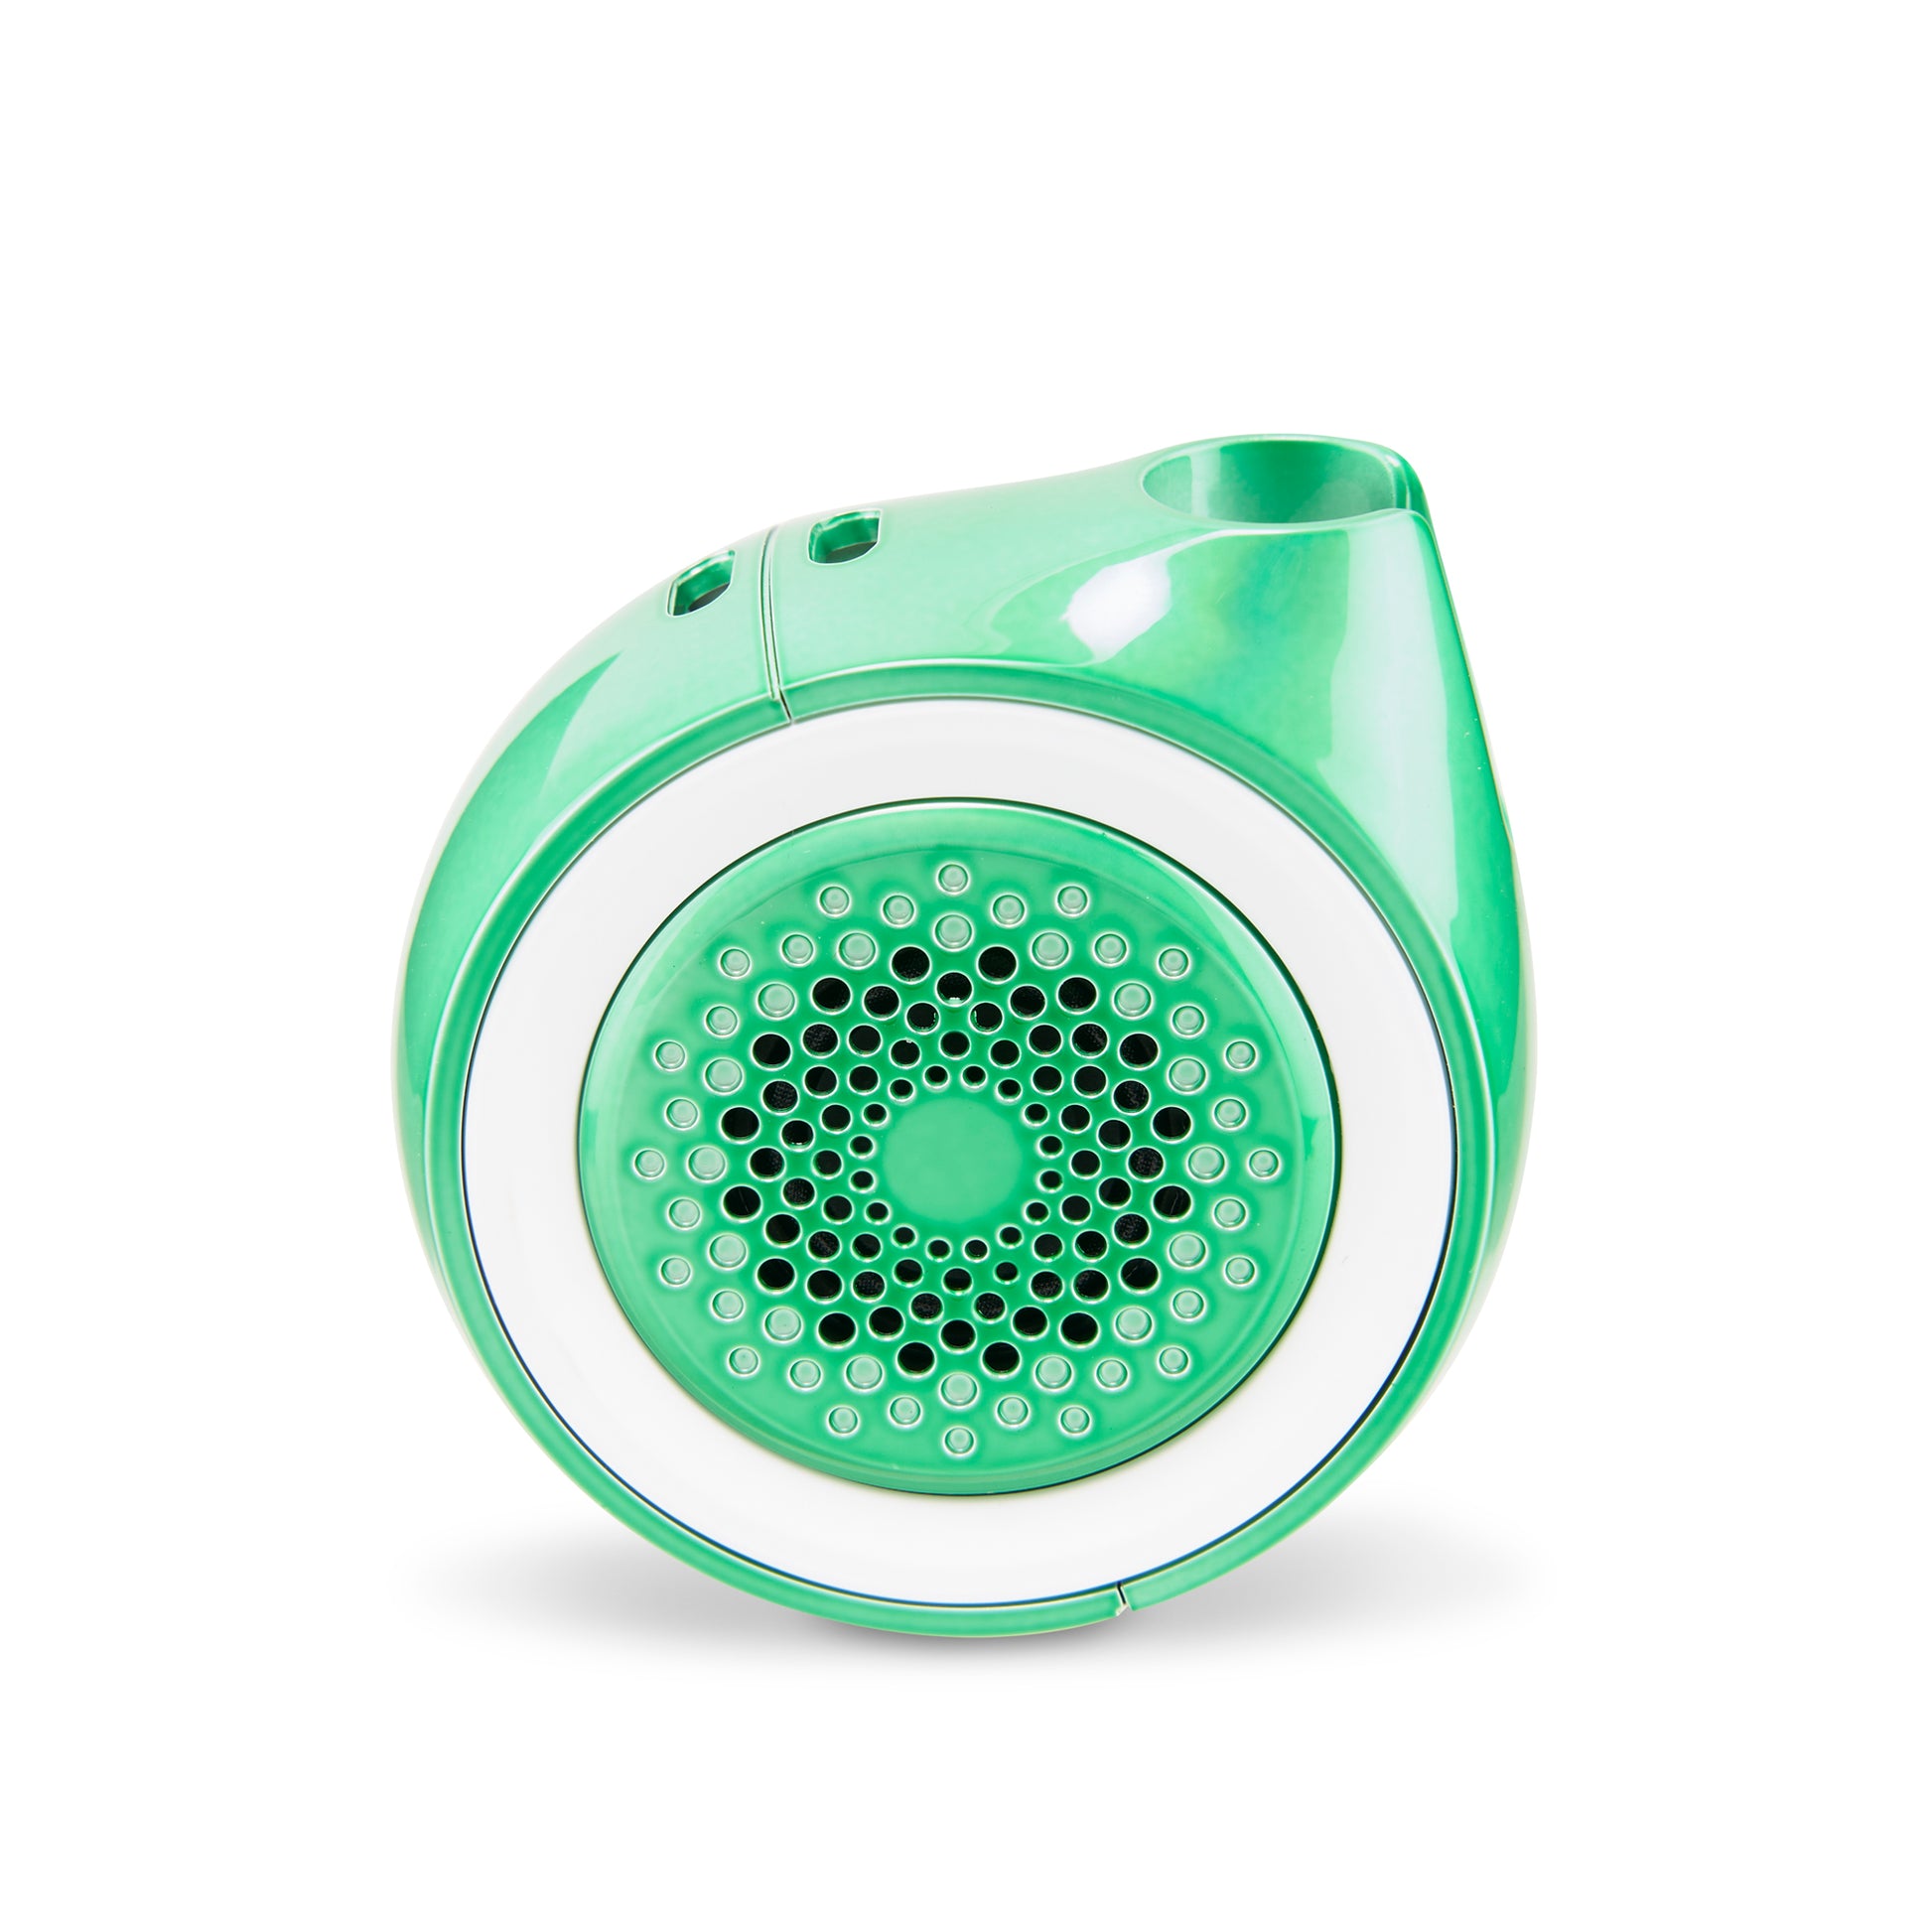 The Ooze Movez Speaker Vape in Mary Jade is shown with the speaker side facing the camera.